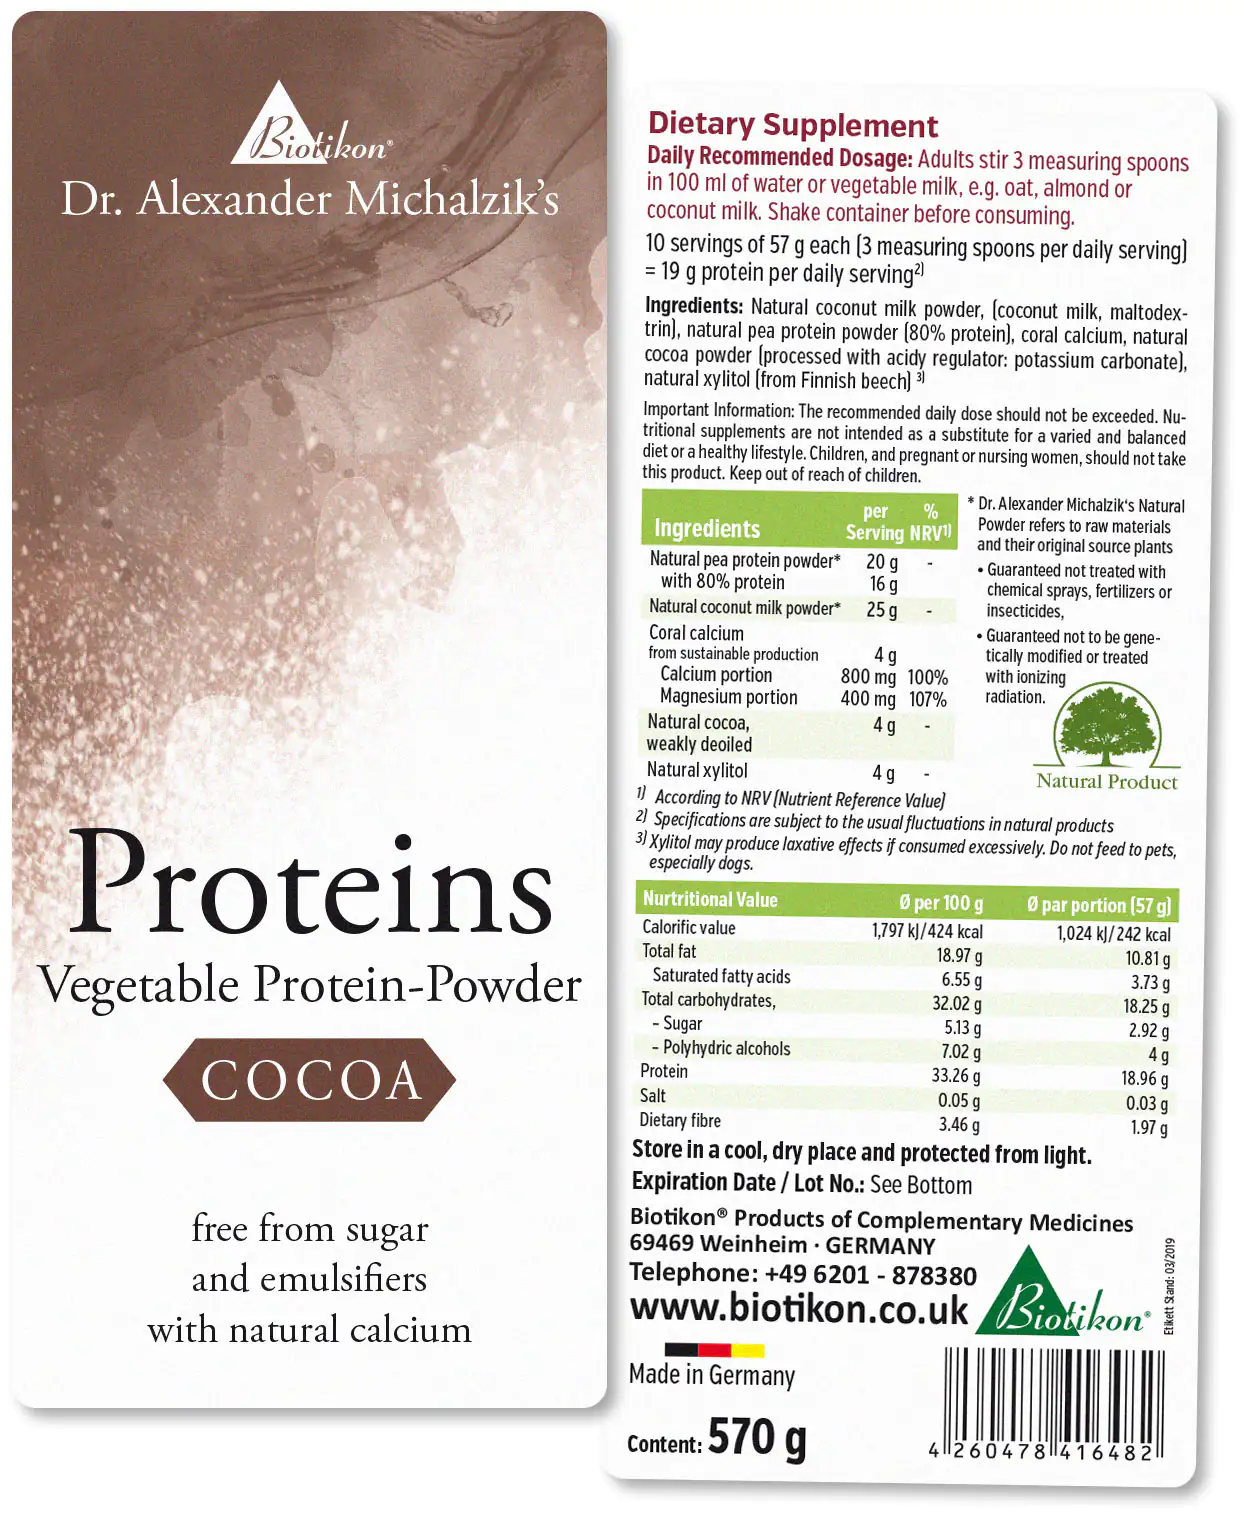 Protein - 3 pack, 2x Coconut + Aronia